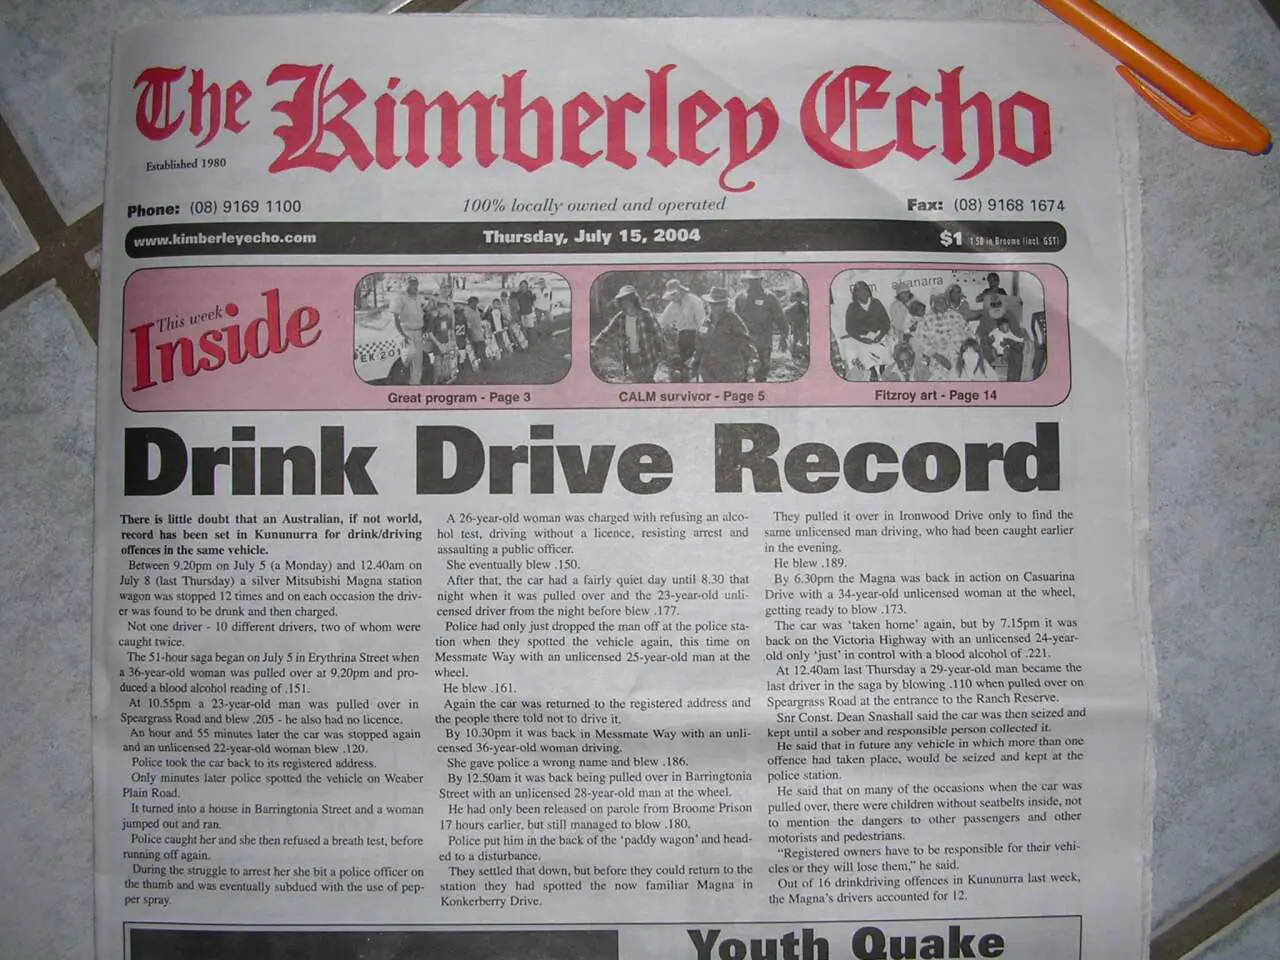 Dui Drink Driving Record | Australia Travel Blog | Driving Under The Influence (Dui) -The Drink Driving Record! | Australian Road Trips, Blood Alcohol Content, Boozing, Drink Driving, Driving Under The Influence, Dui, Road Trip, Western Australia | Author: Anthony Bianco - The Travel Tart Blog